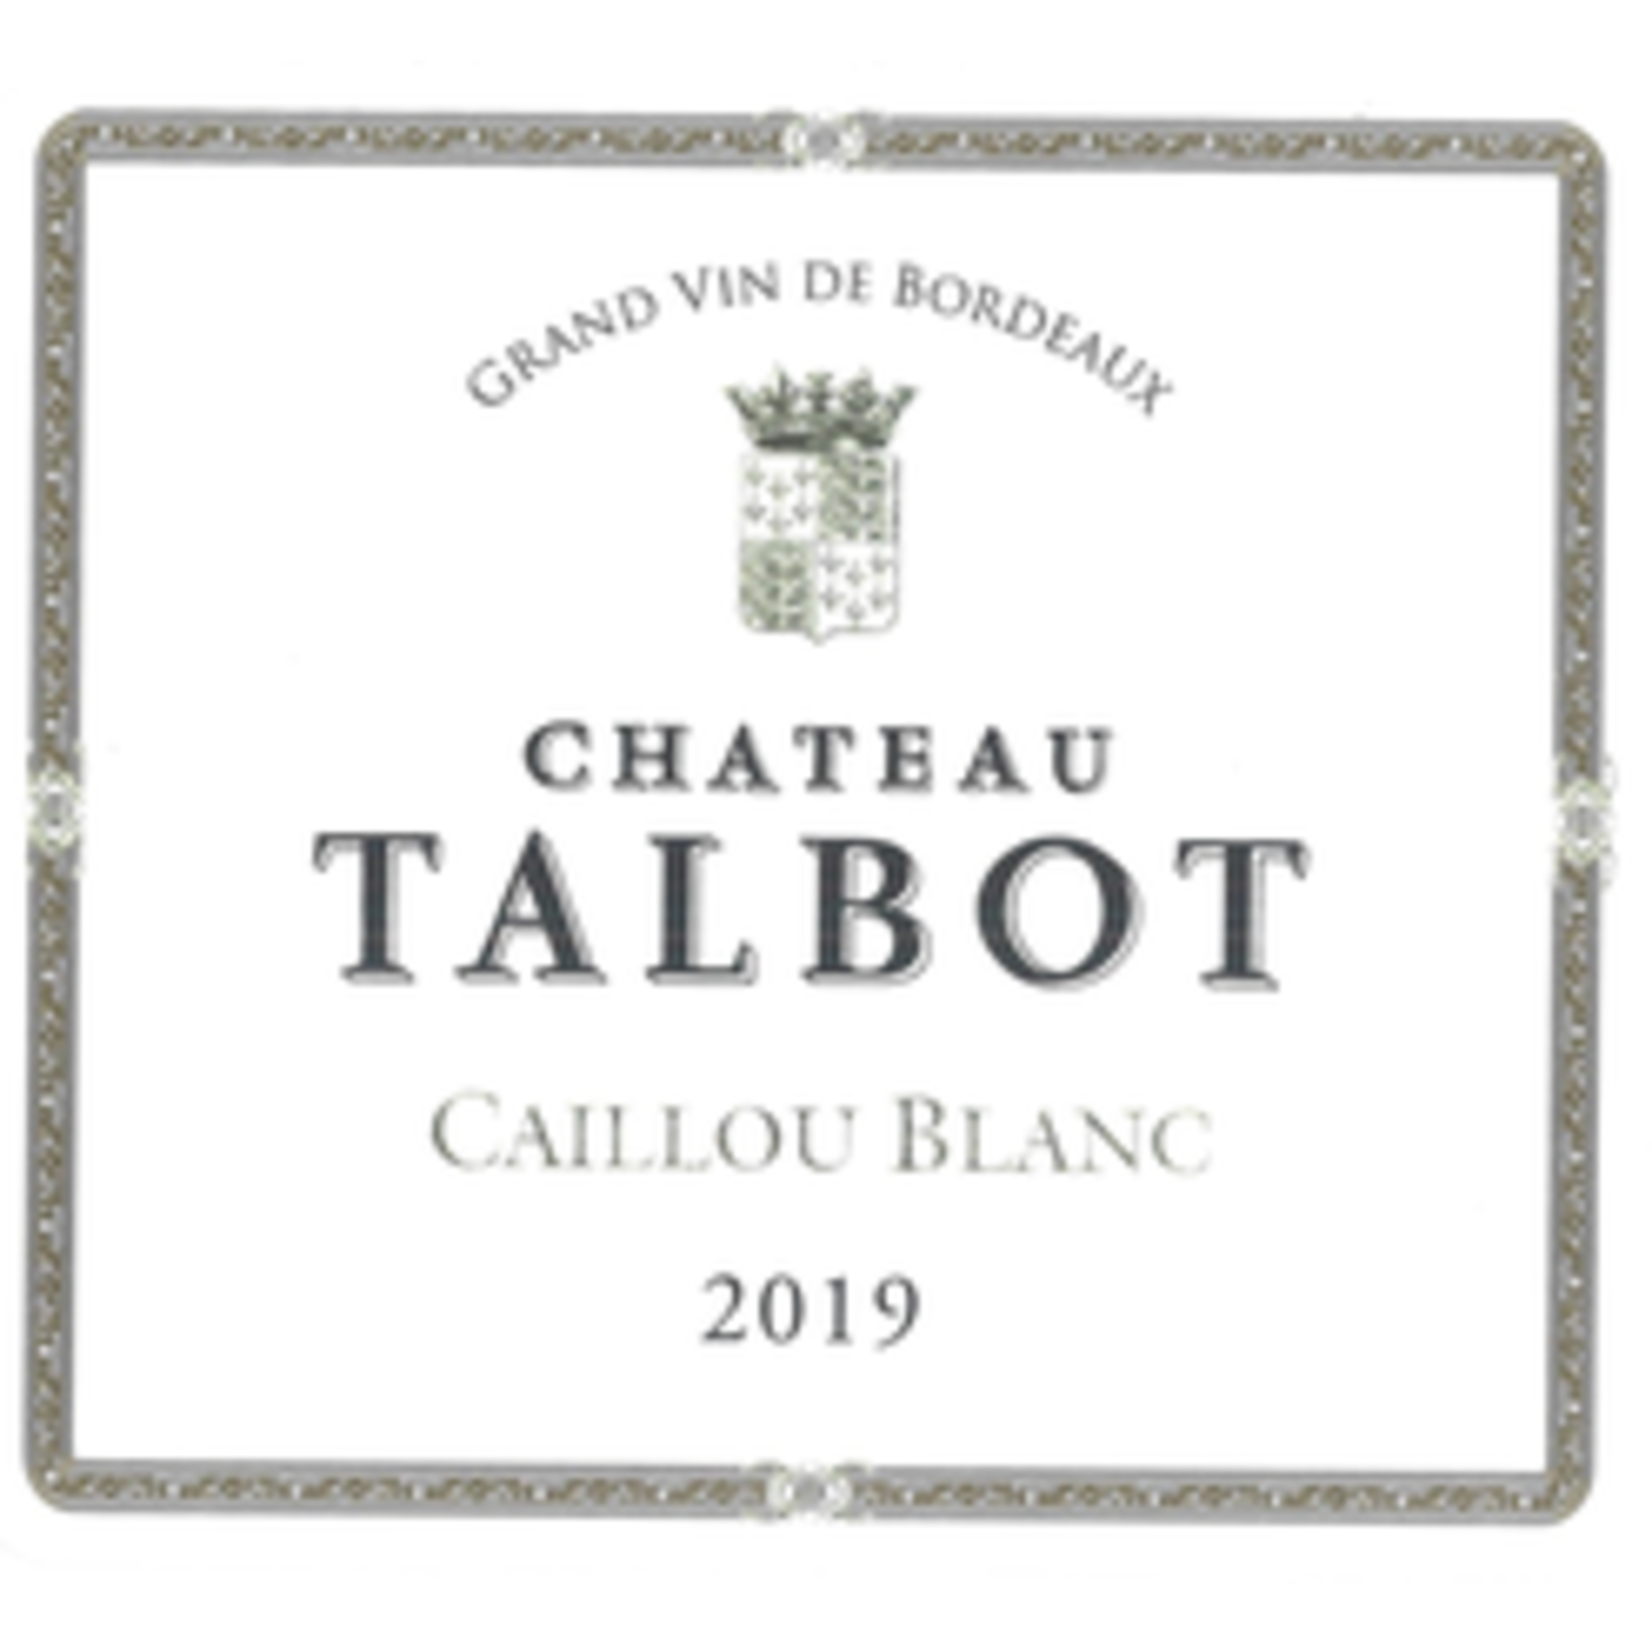 Wine Chateau Talbot Caillou Blanc 2019